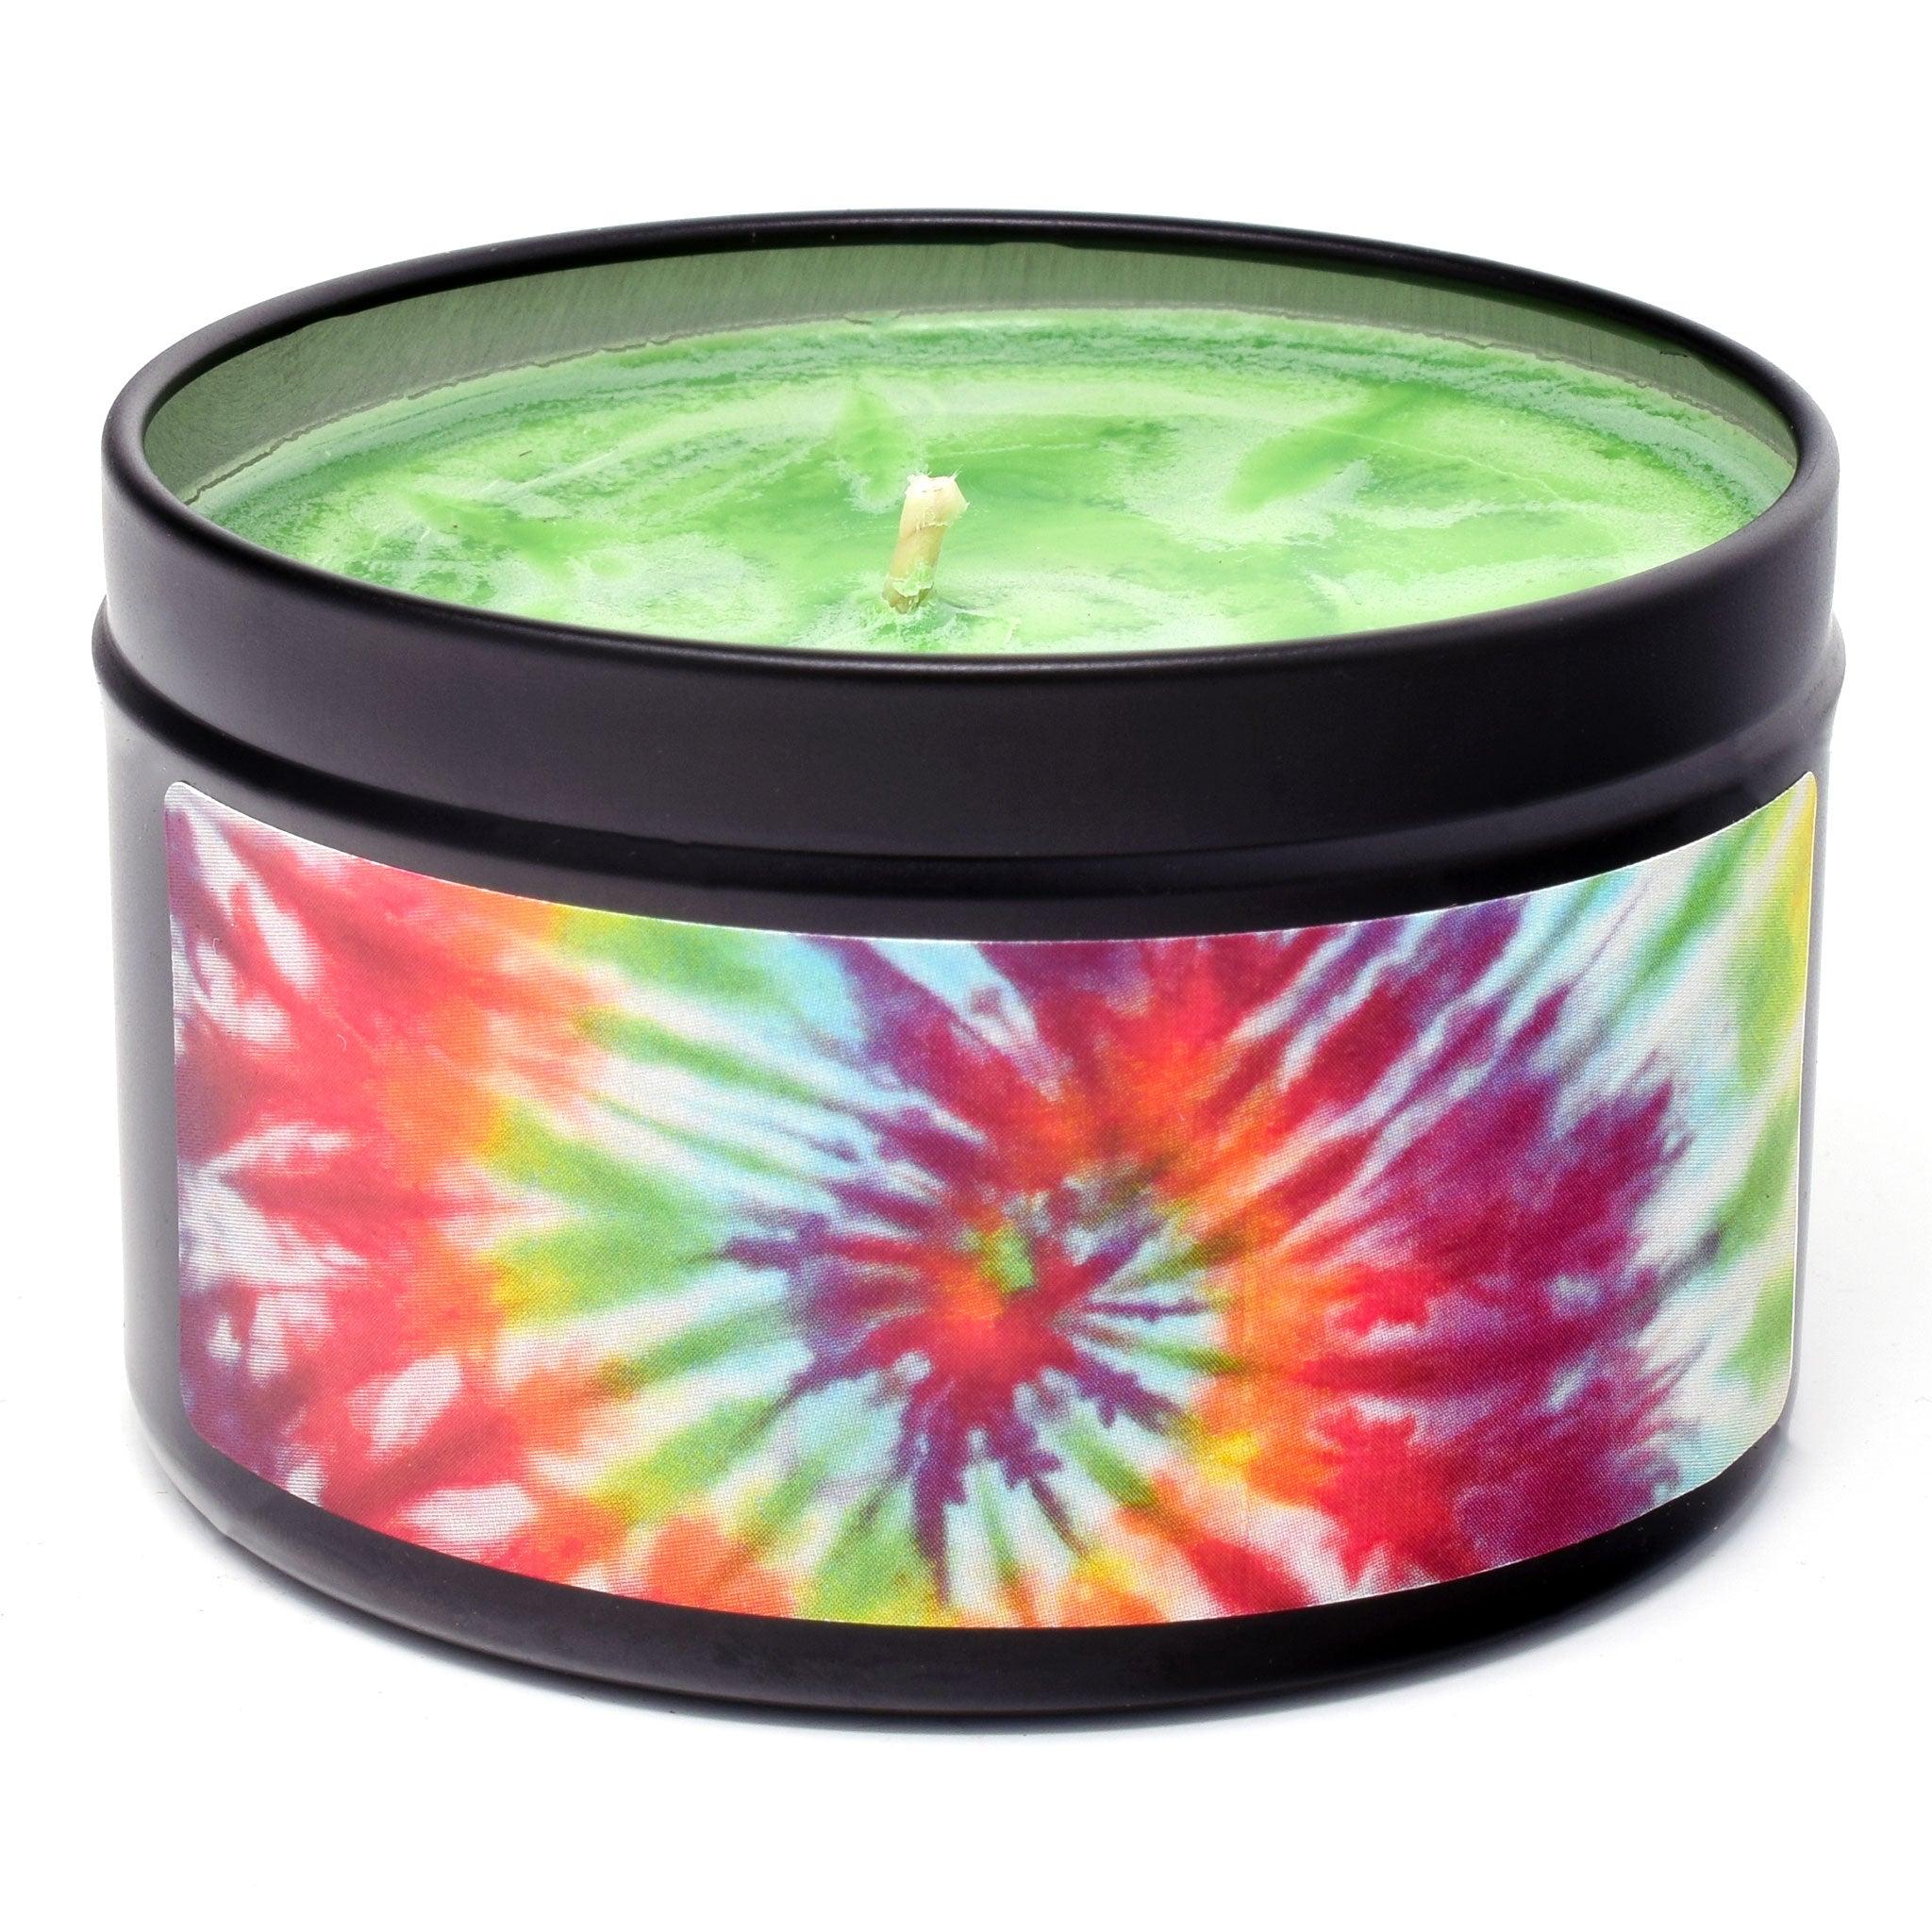 Happy Hippy, 6oz Soy Candle Tin - Candeo Candle